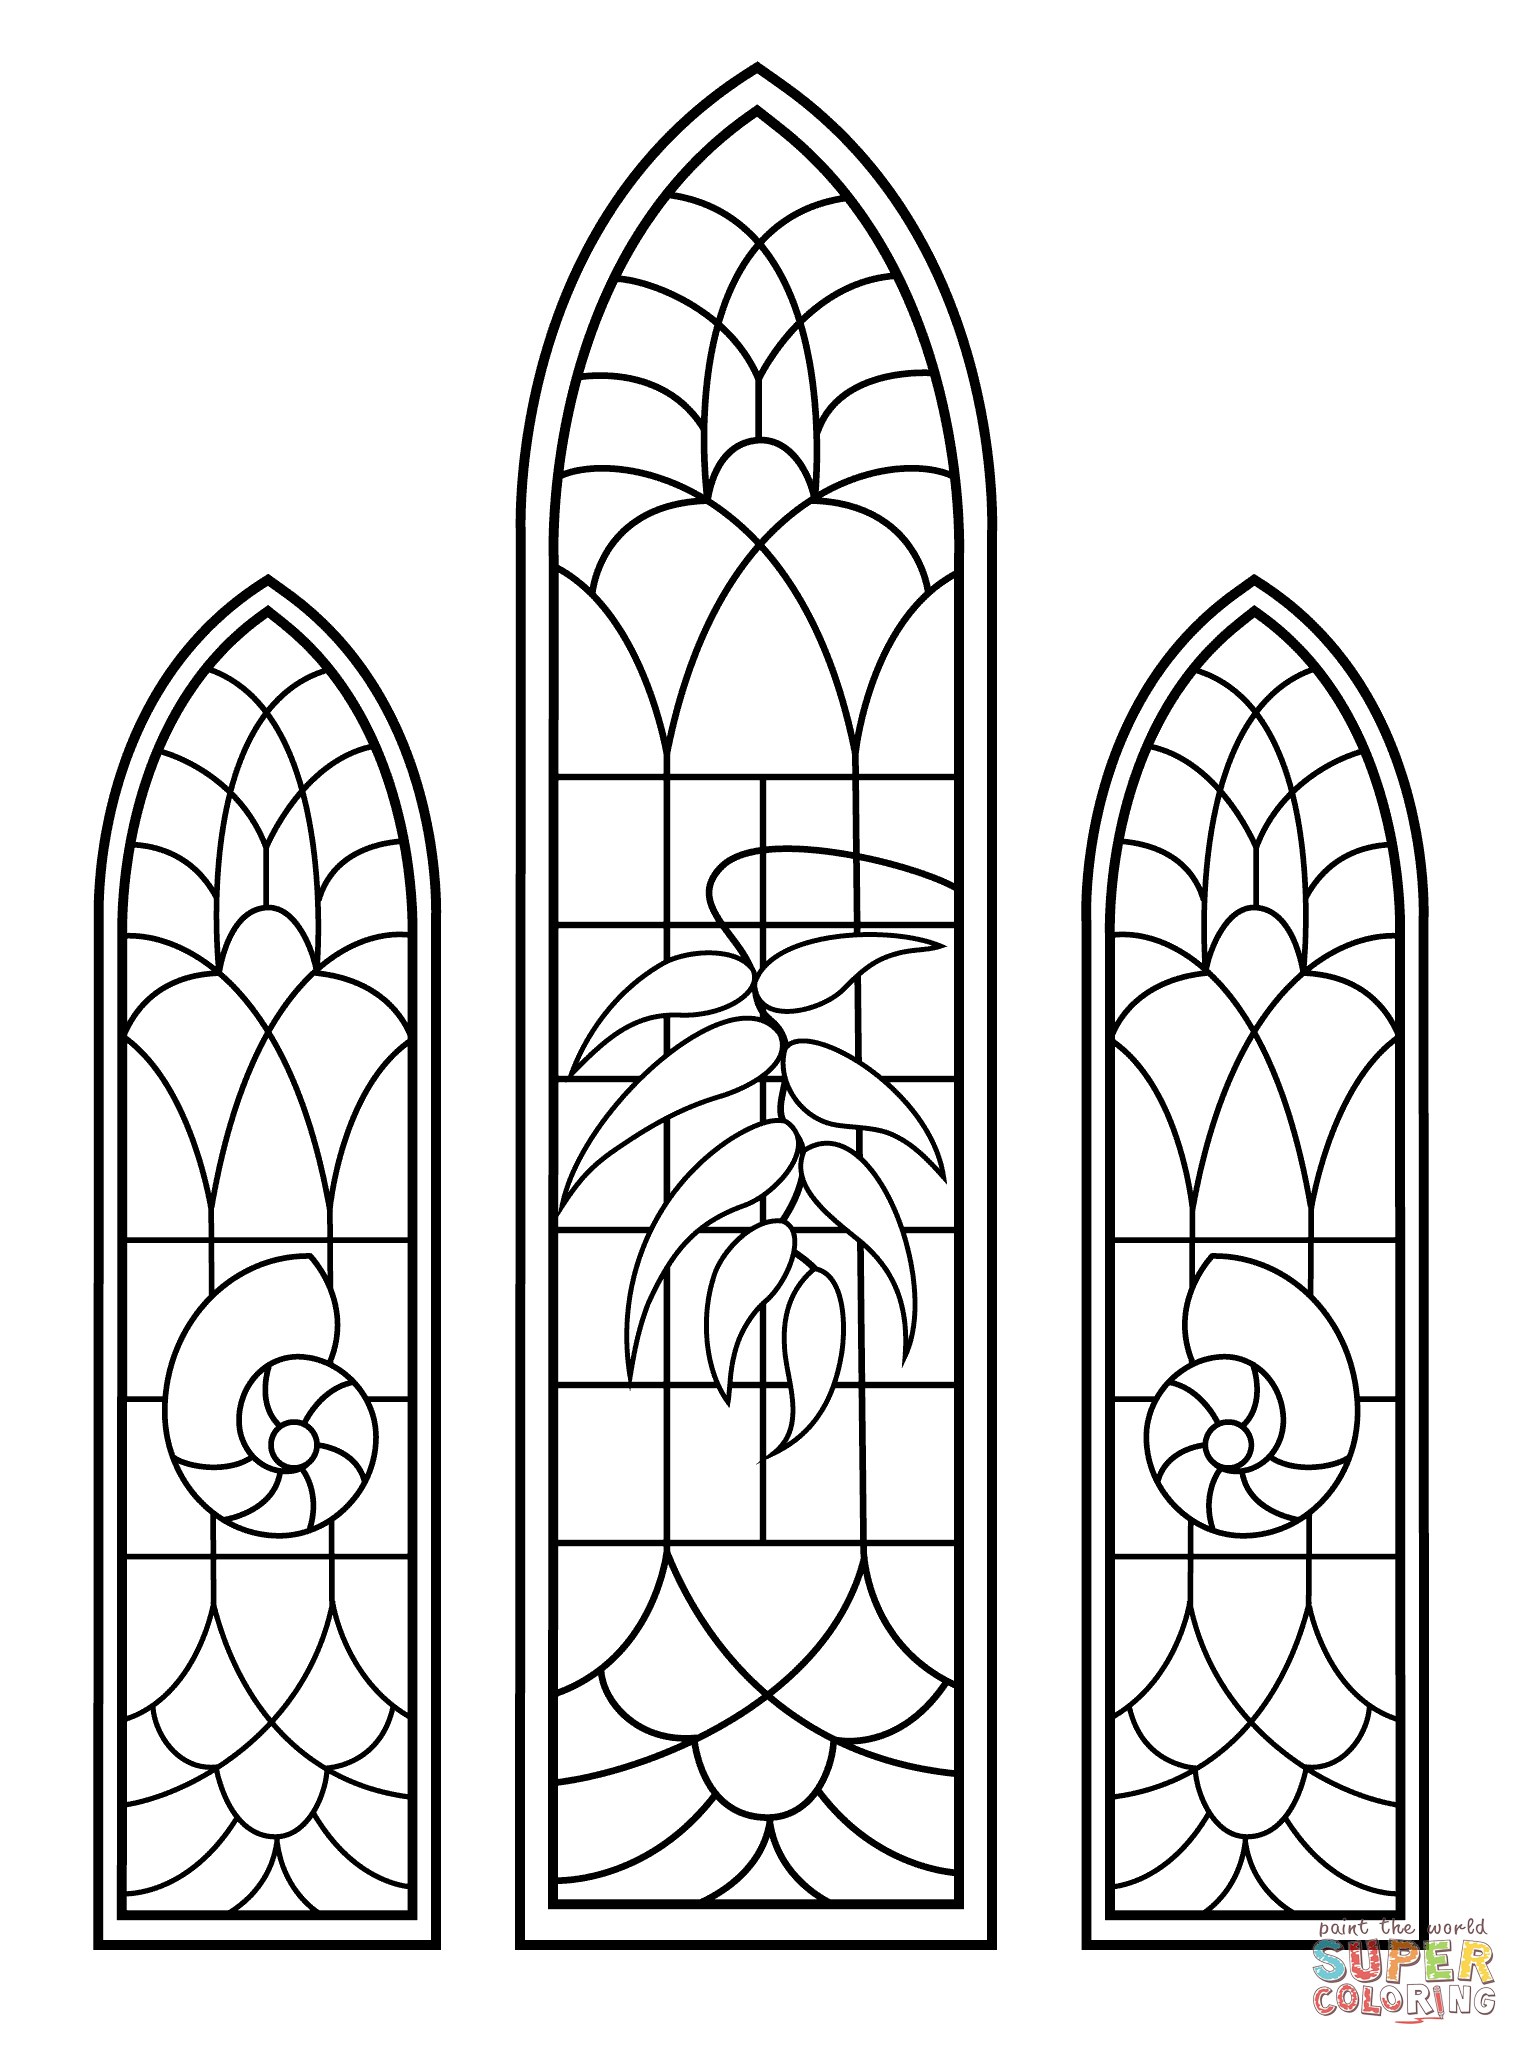 Stained glass window coloring pages download and print for free